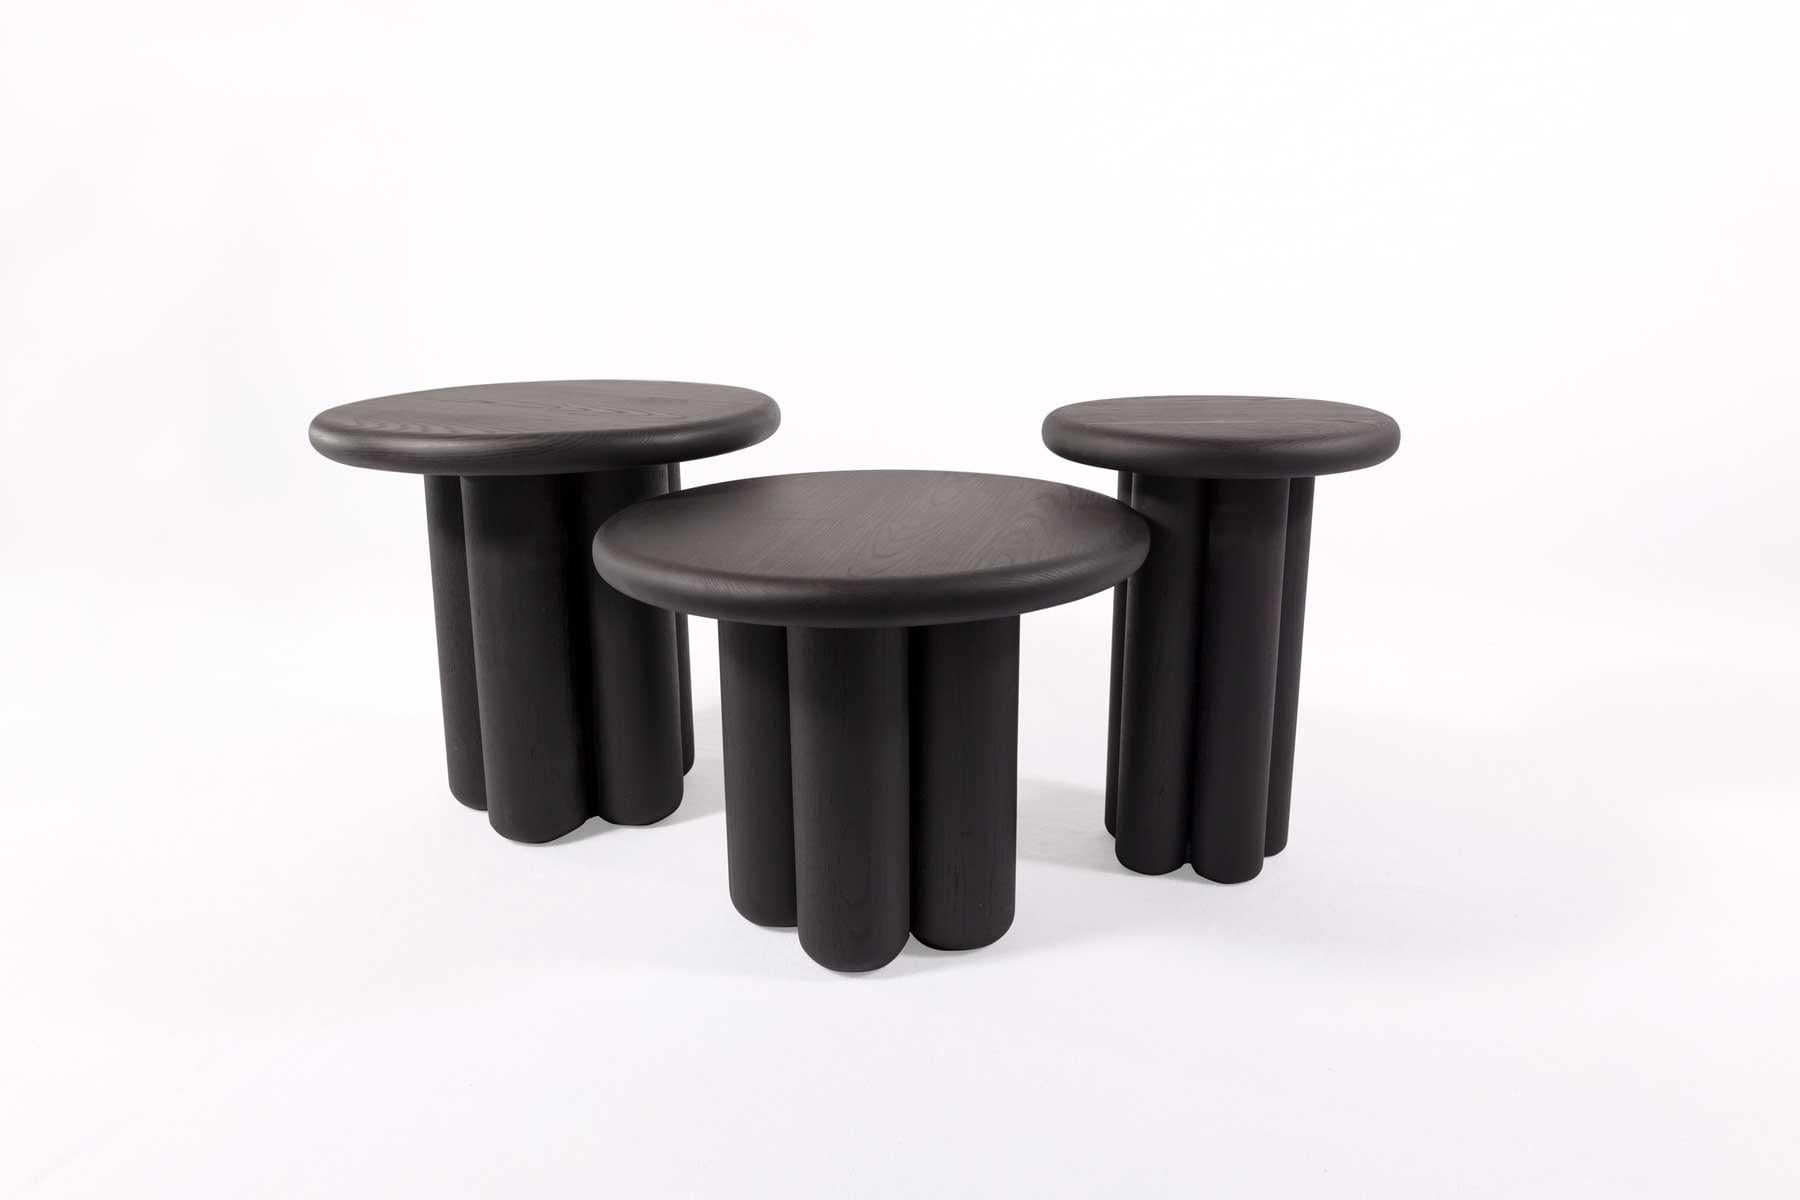 A collection of tables designed to work independently or as a group of nested pieces. Each table is comprised of five rounded legs and a rounded top. Custom colours, sizing and heights are available upon request.

13 - 13